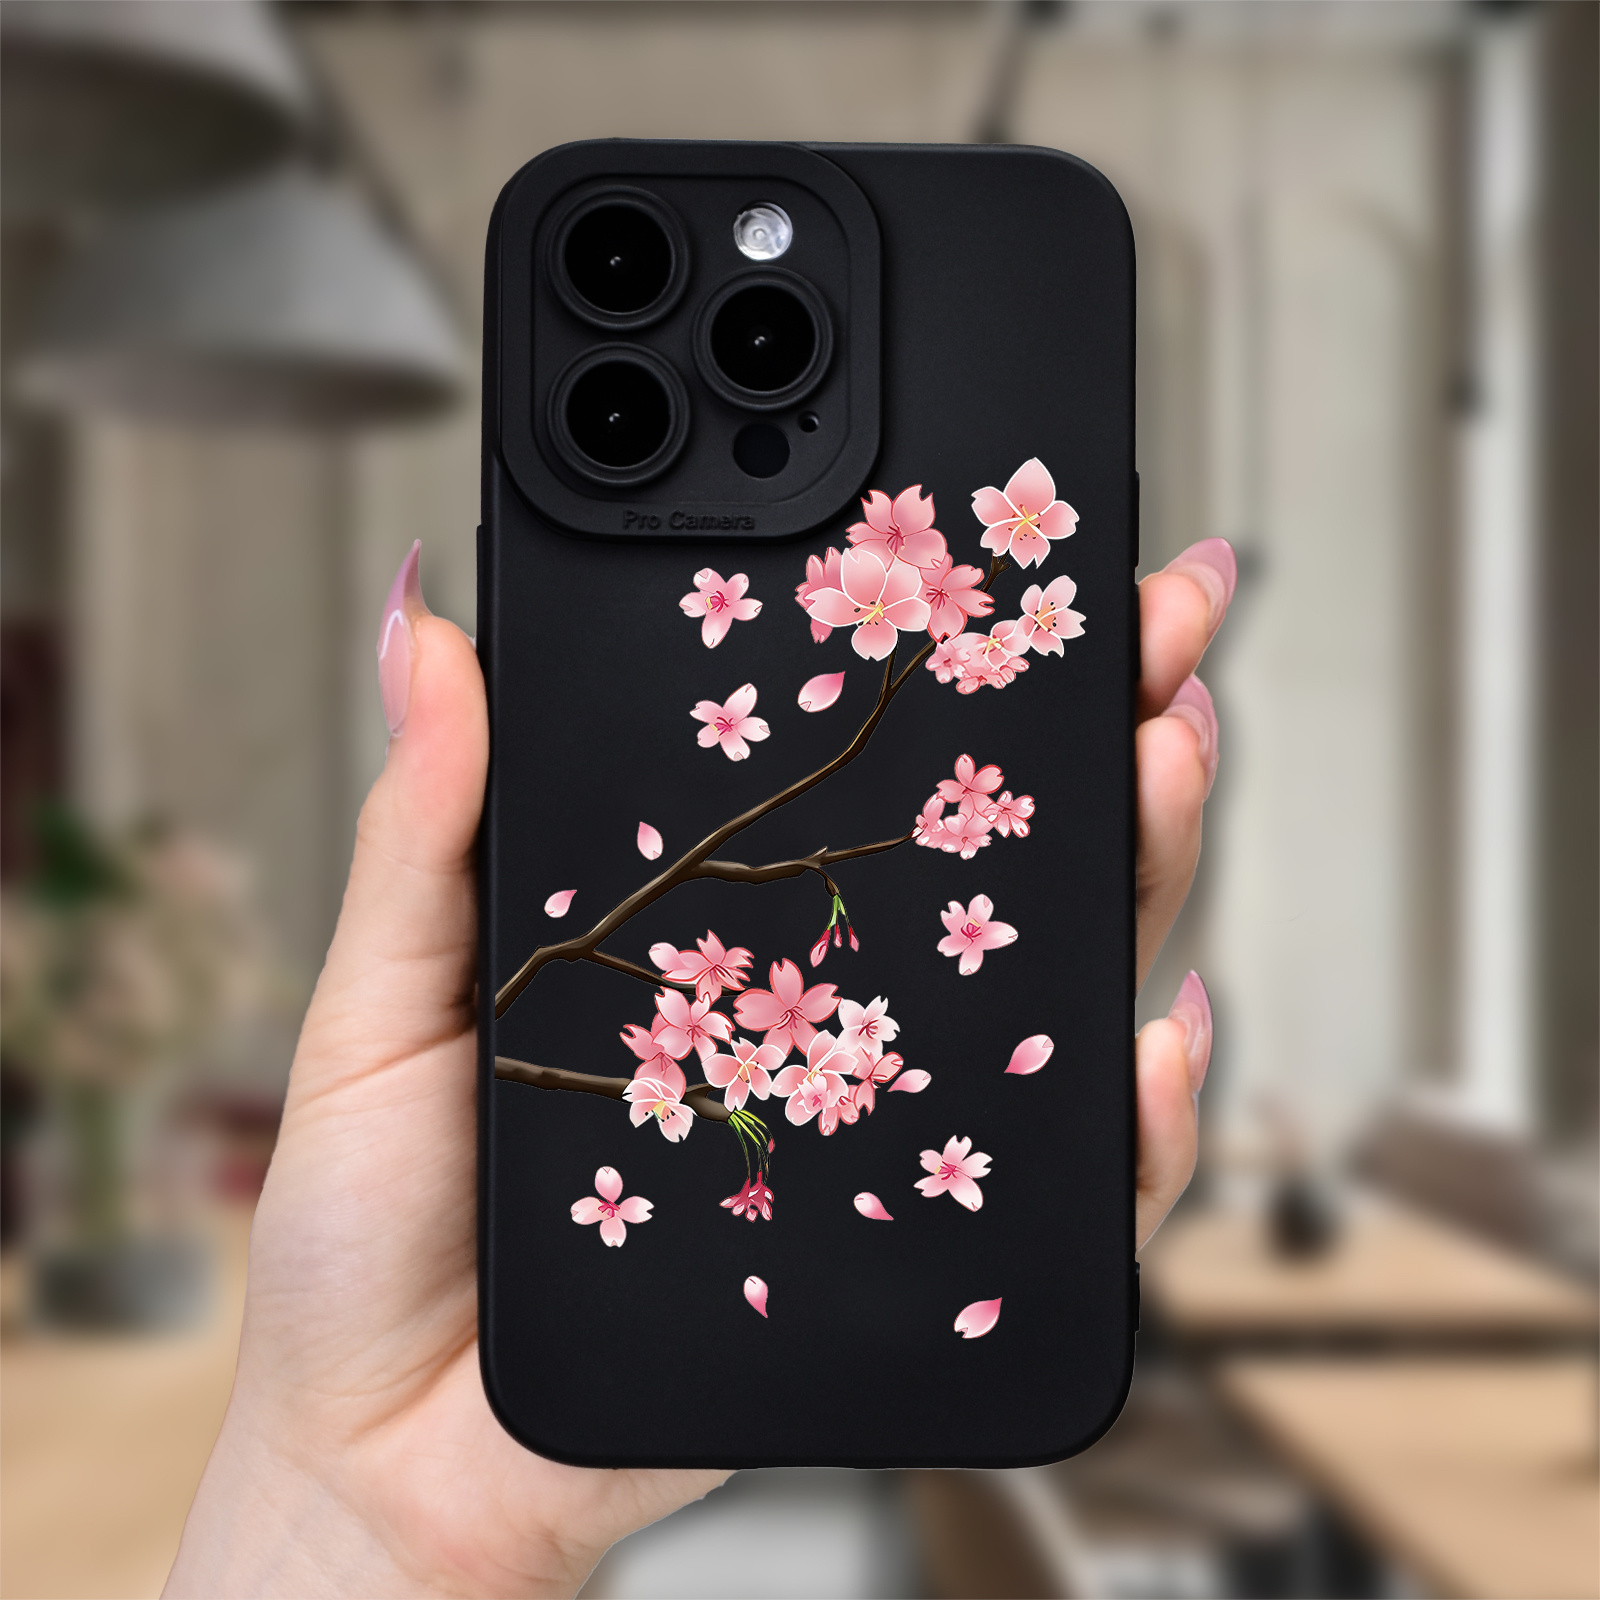 

Graphic Printed Phone Case For 15 14 13 12 11 X Xr Xs 8 7 Mini Plus Pro Max Se, Gift For Easter Day, Christmas Halloween Deco/gift For Girlfriend, Boyfriend, Friend Or Yourself